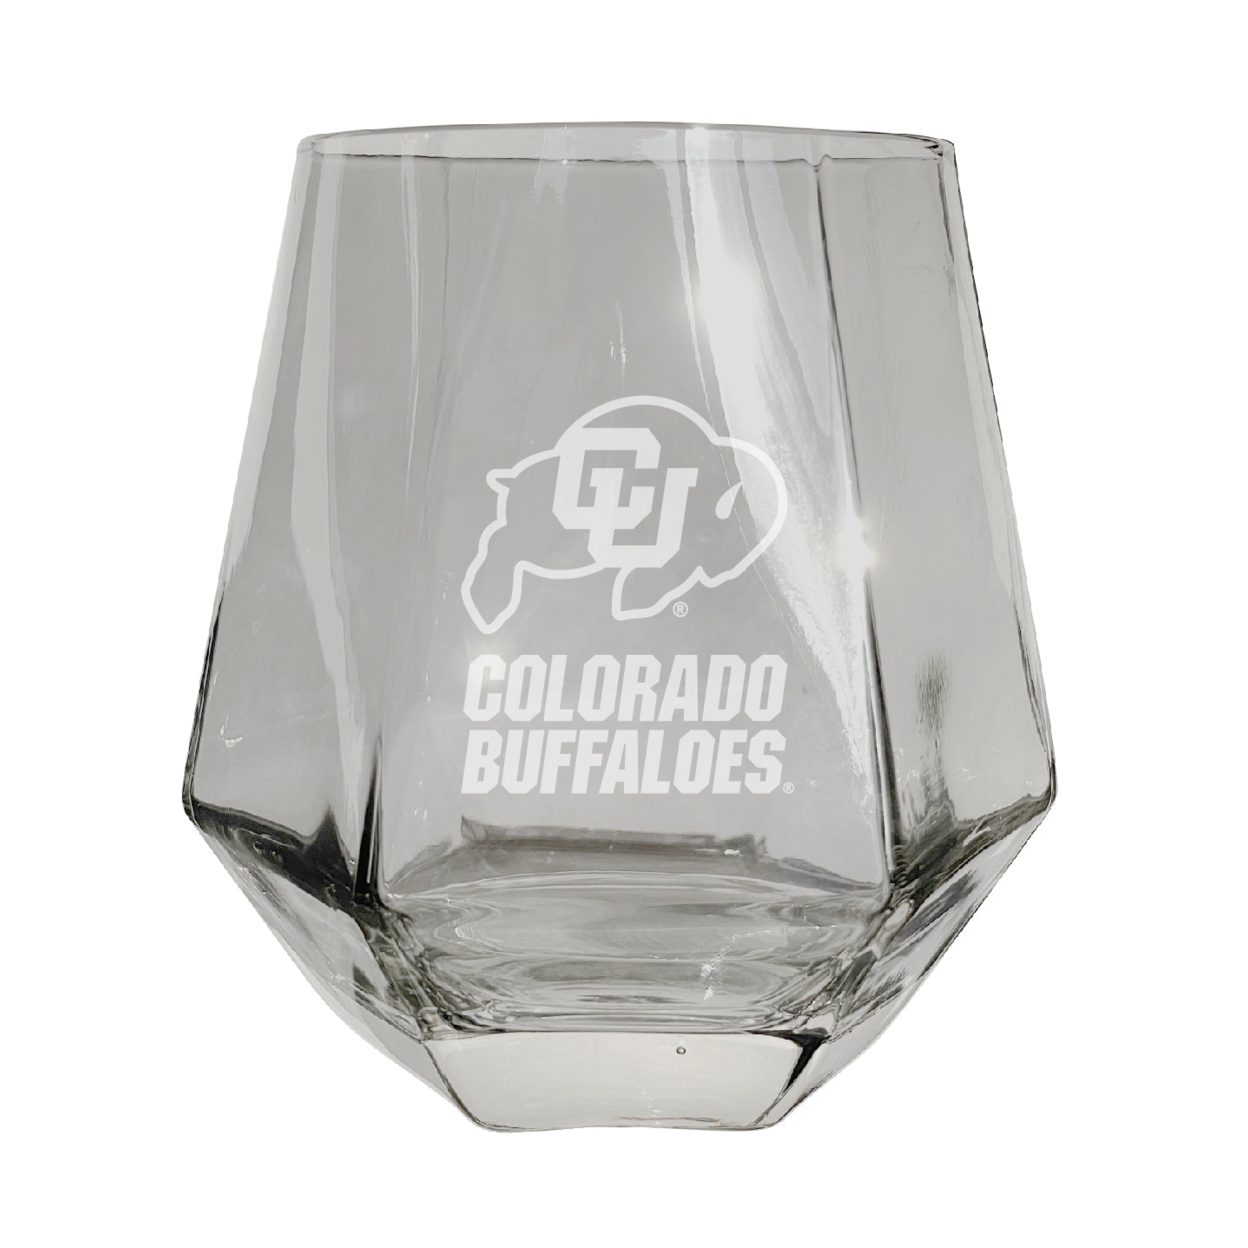 Colorado Buffaloes Etched Diamond Cut Stemless 10 Ounce Wine Glass Clear